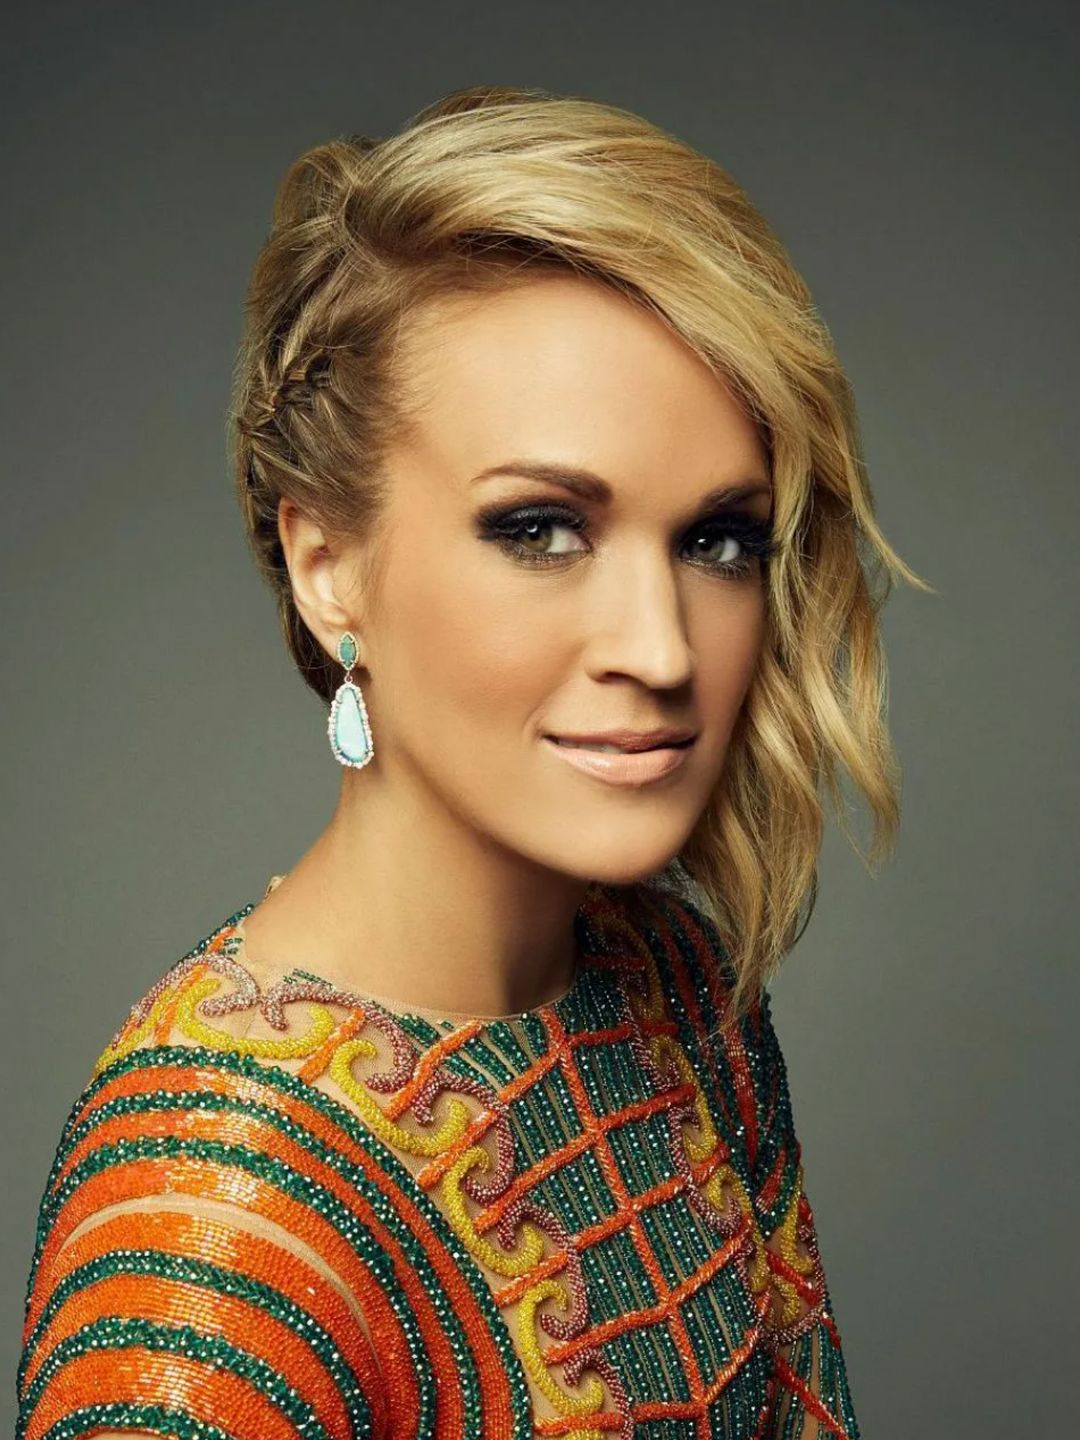 Carrie Underwood does she have a husband